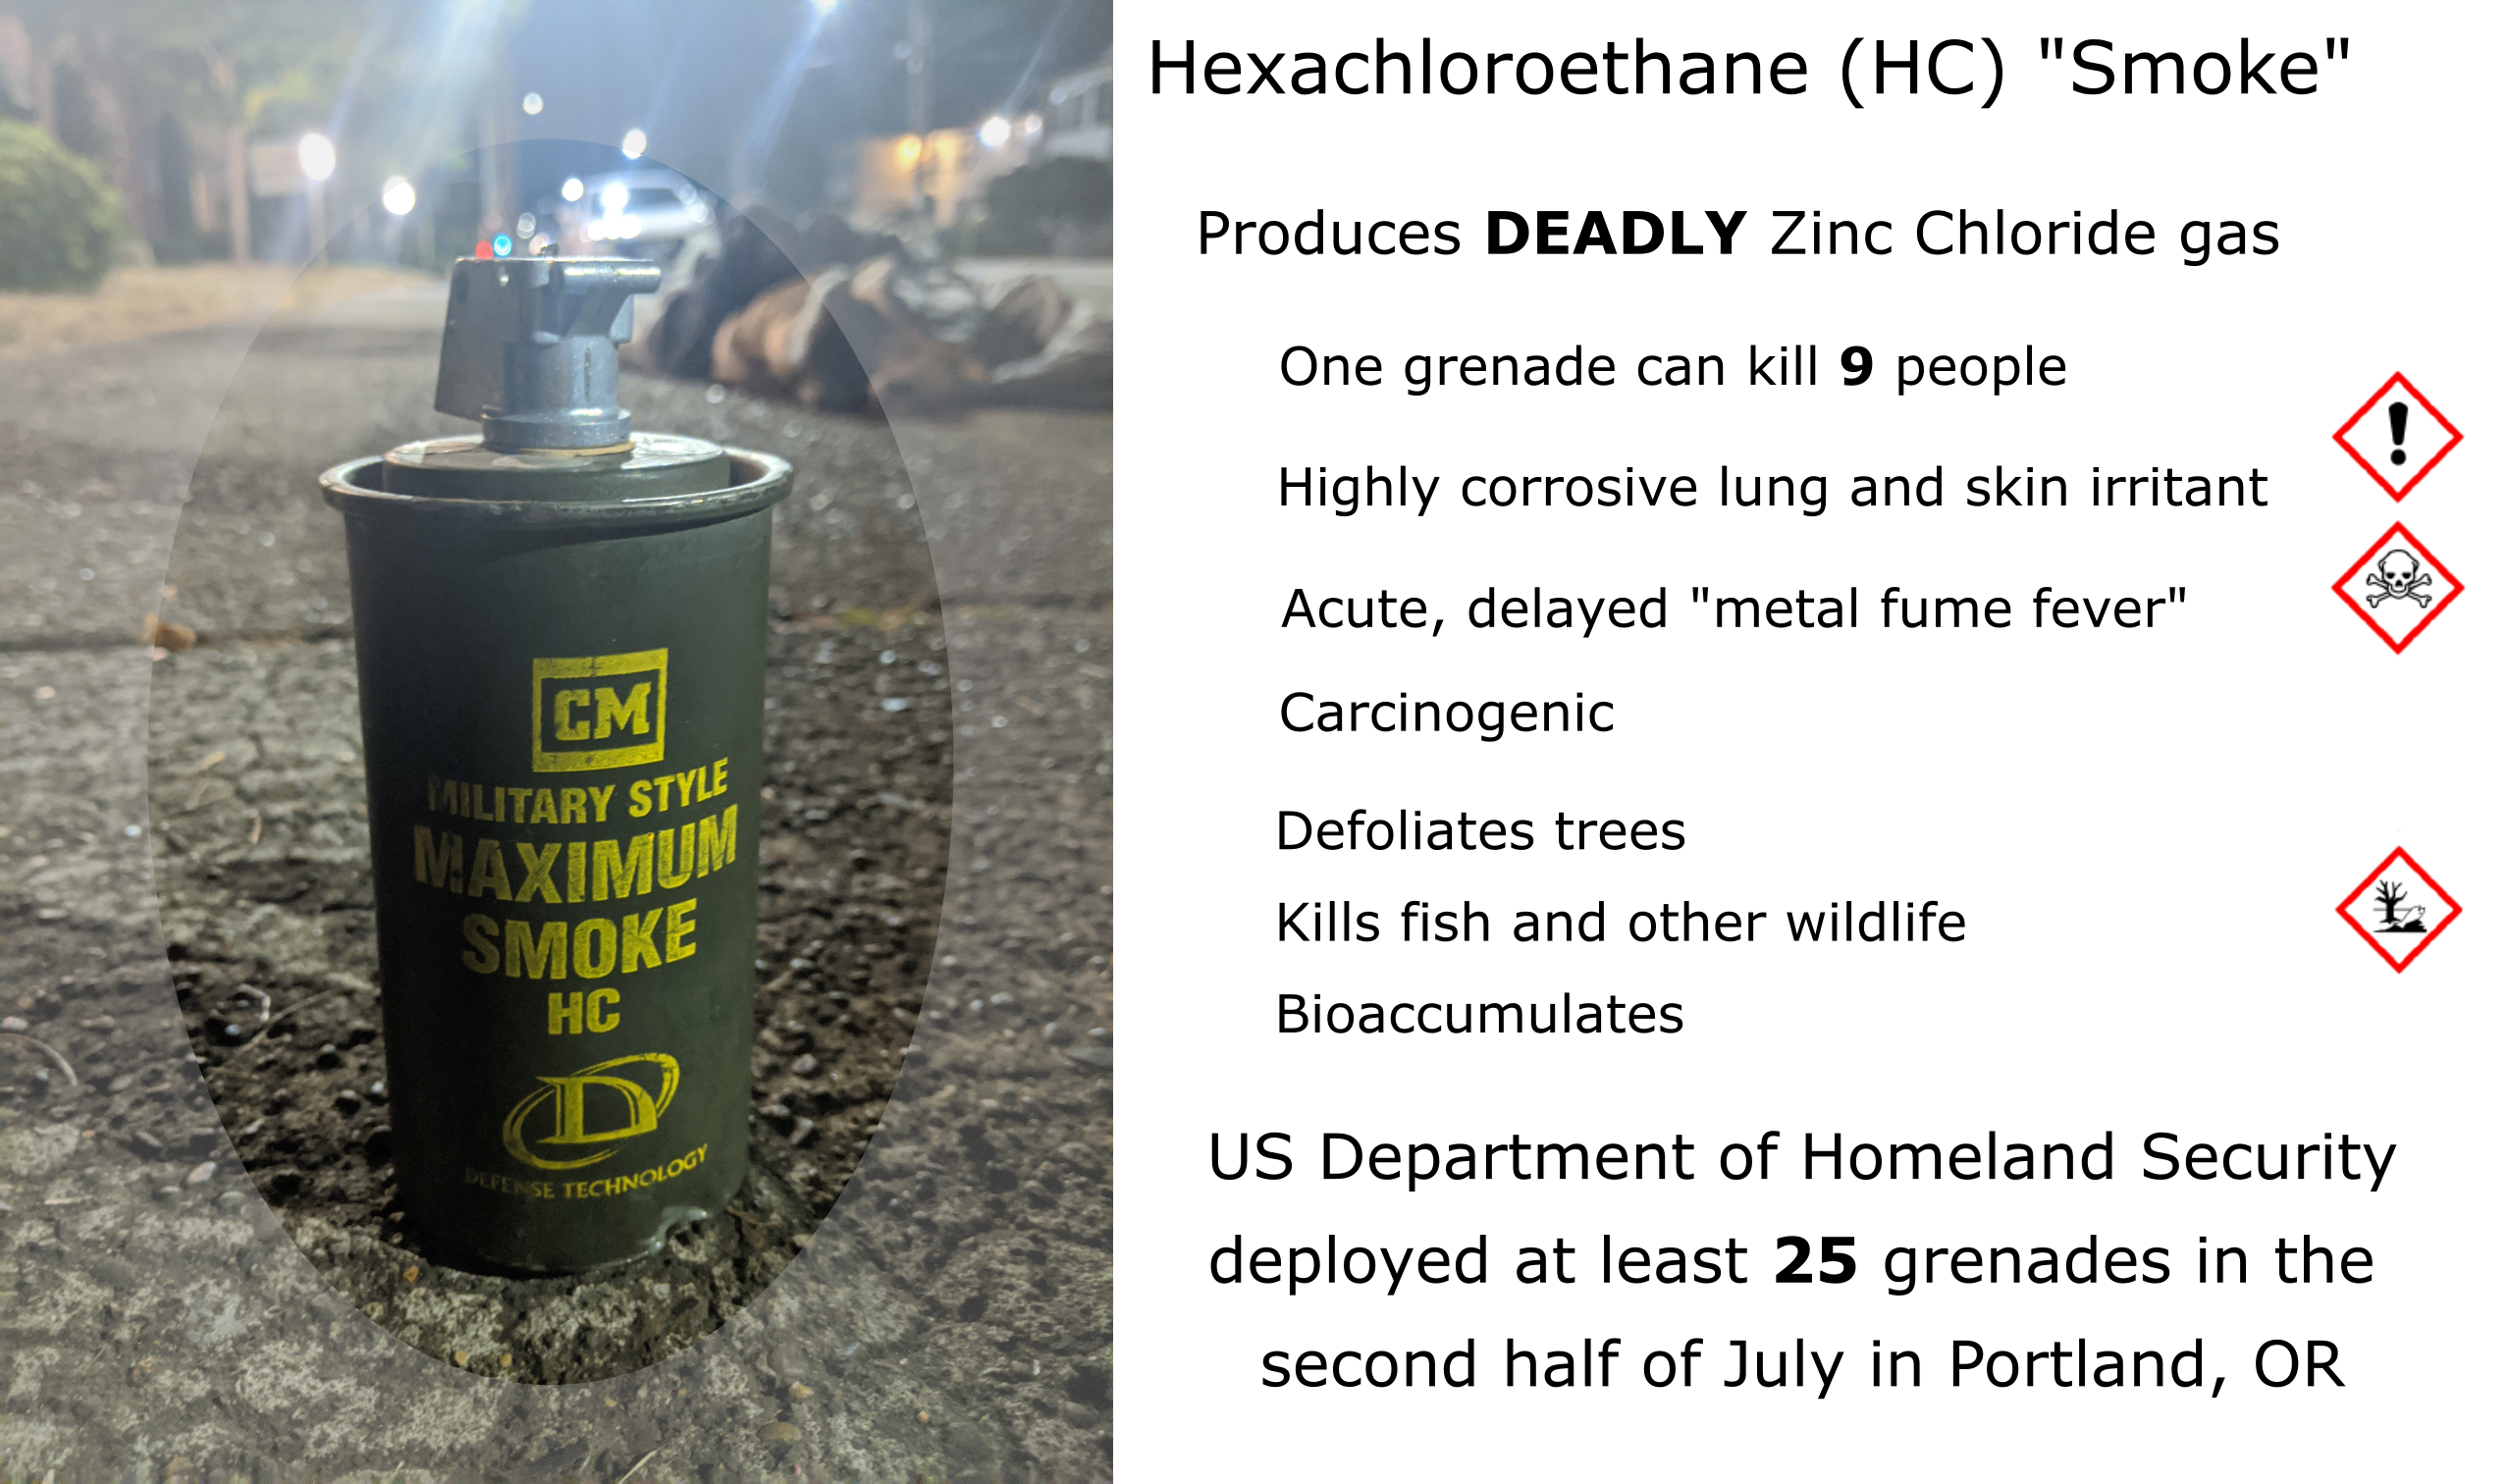 Two panel image, left half is a photo of a green grenade canister with yellow writing that says CM Military Style Maximum Smoke HC Defense Technology with a halo effect around the can. right half is info: Hexachloroethance (HC) Smoke. Produces DEADLY Zinc Chloride gas, one grenade can kill 9 people, highly corrosive lung and skin irritant, acute delayed metal fume fever, carinogentic, defoliates trees, kills fish and other wildlife, bioaccumulates, has GHS symols for irritant, toxic, and environemtal toxin. us department of homeland security seplyed at least 25 grenades in the second half of  july in portland or